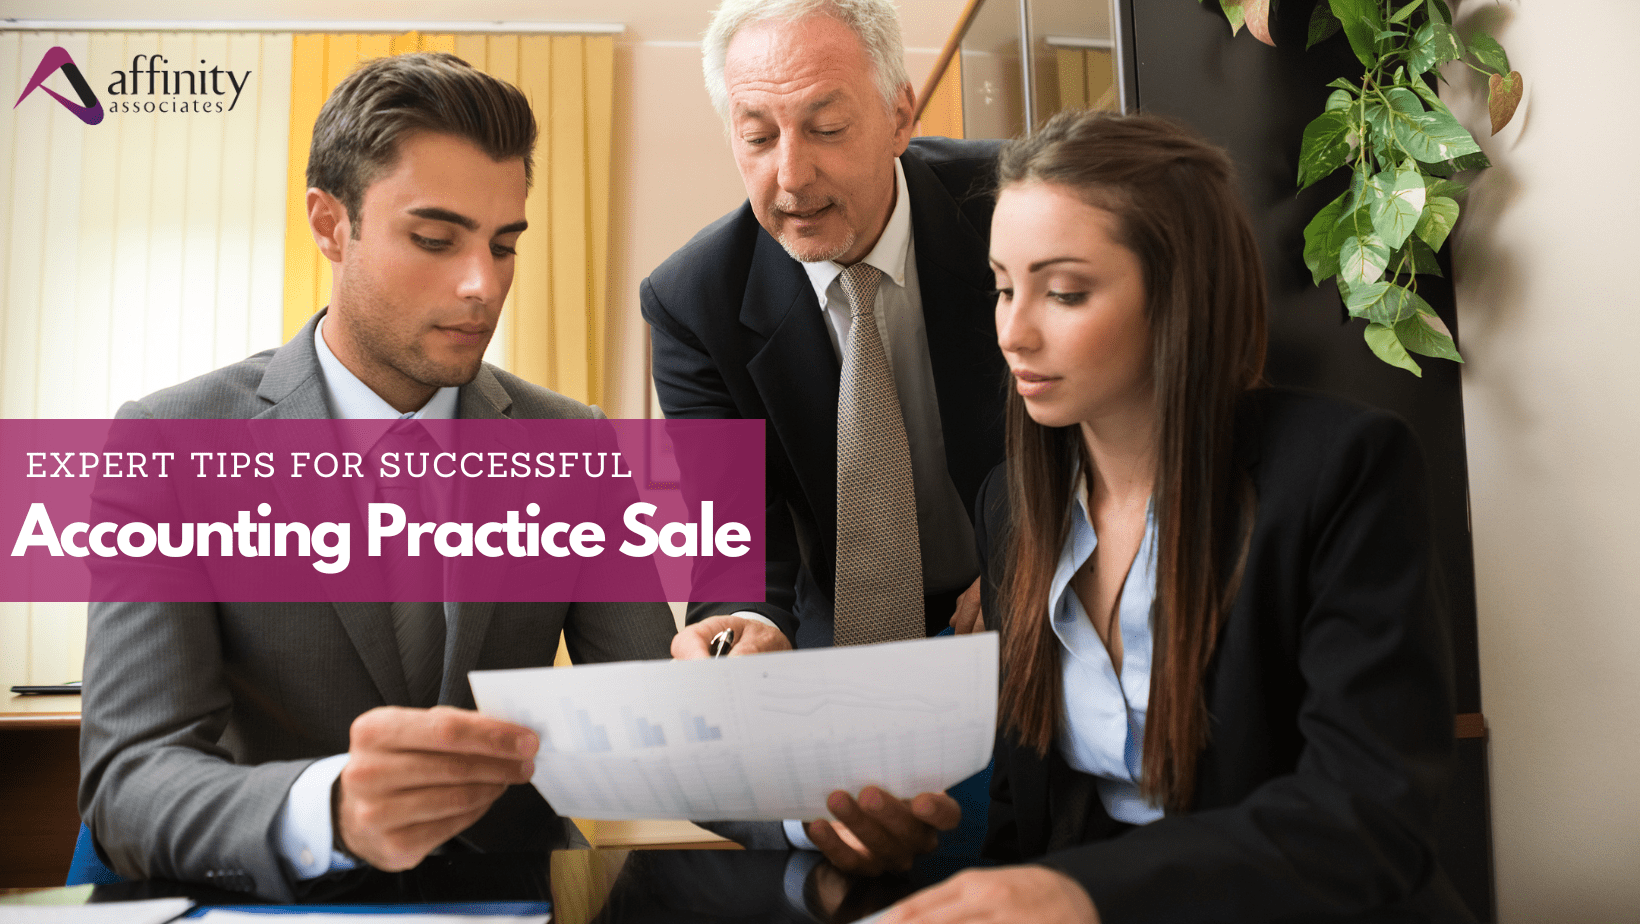 How to get more value from your practice sale